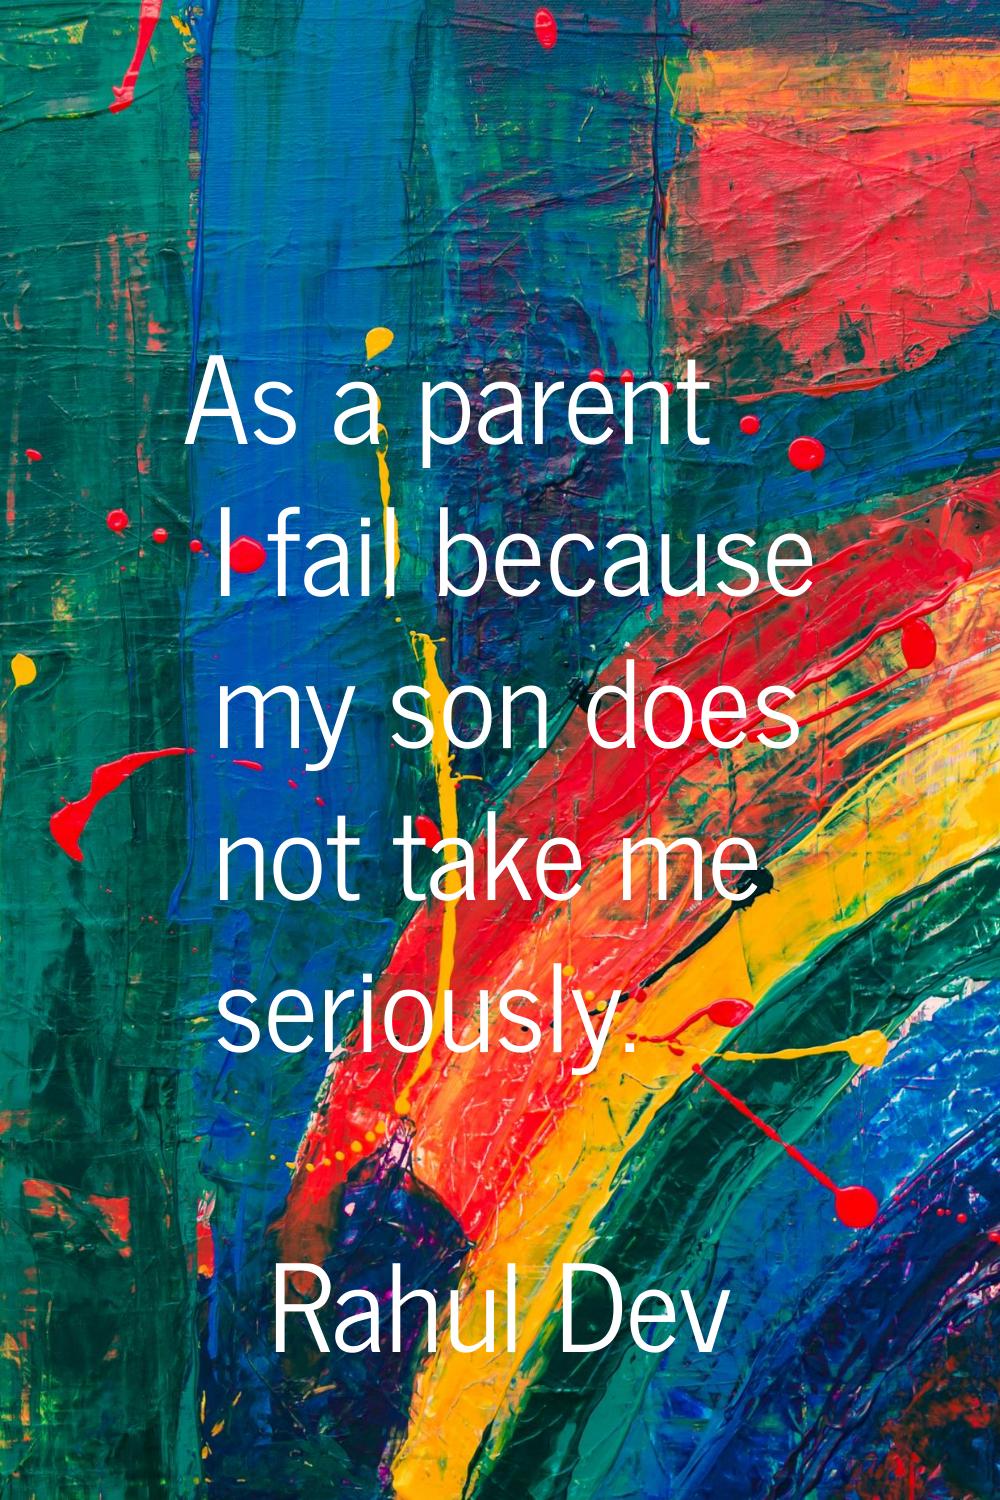 As a parent I fail because my son does not take me seriously.